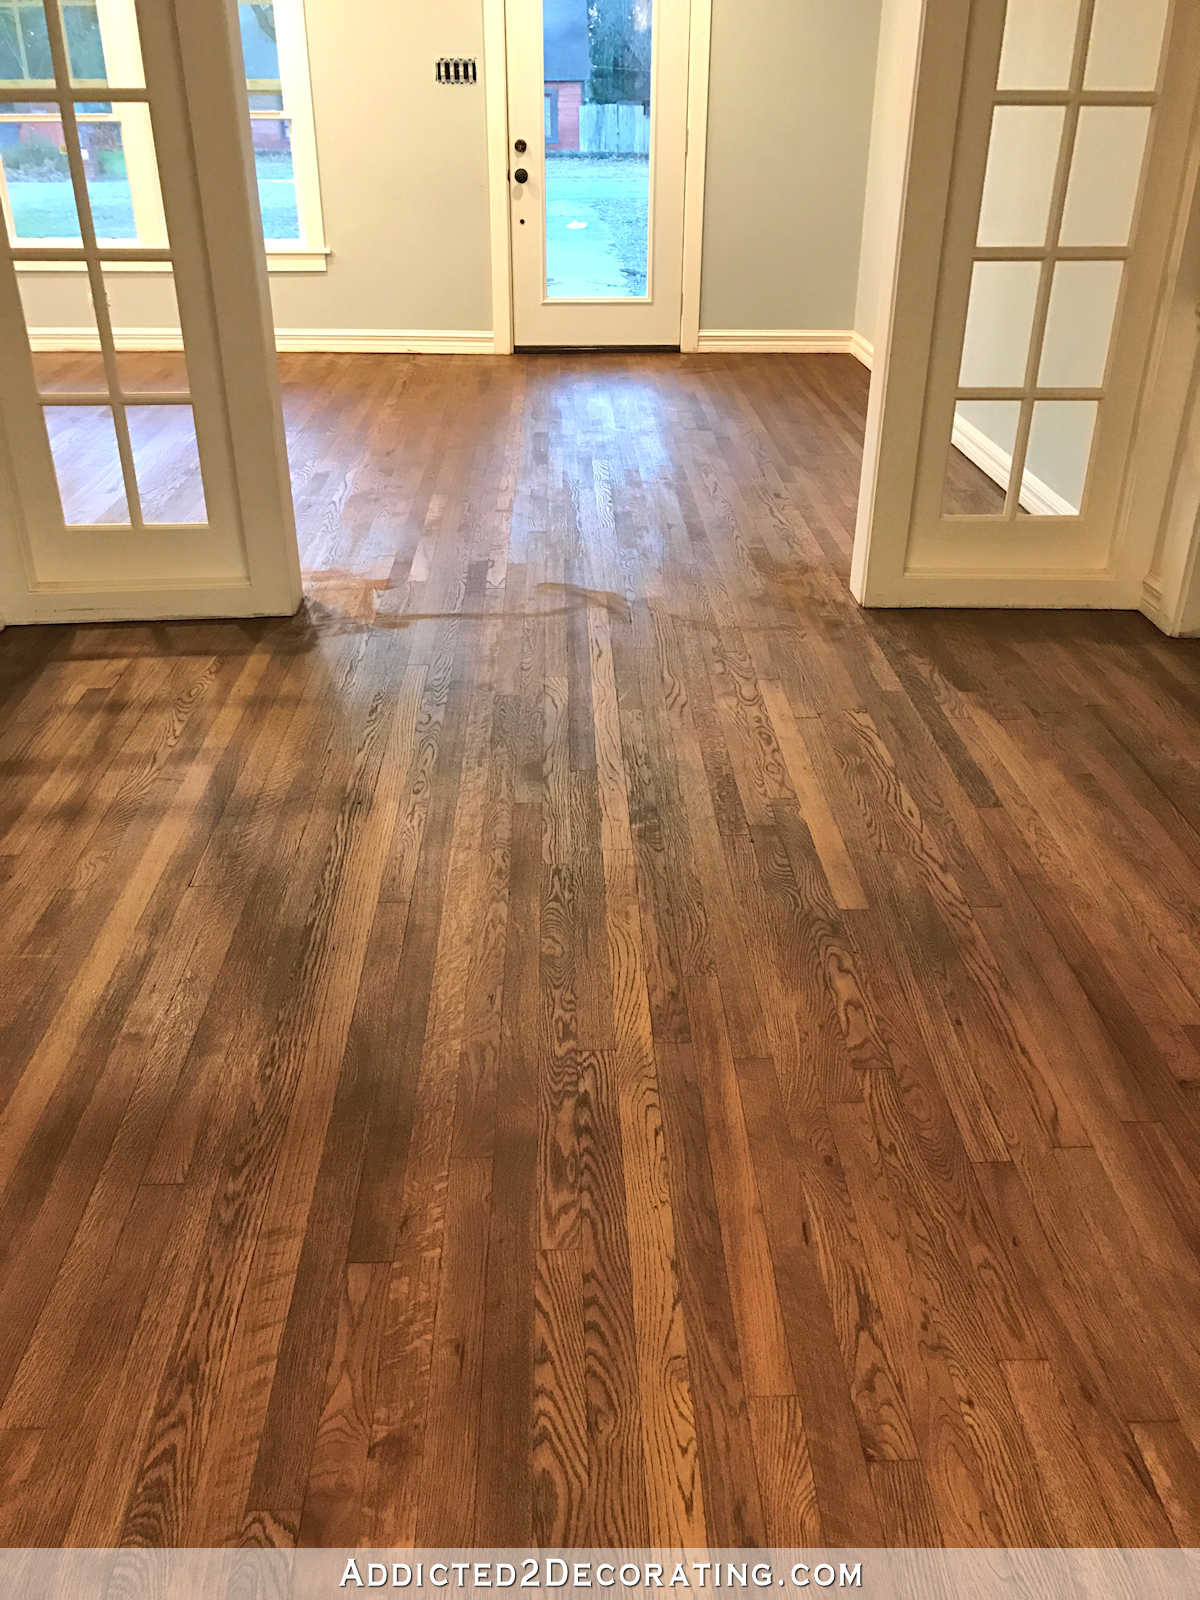 15 Famous Uneven Hardwood Floor Repair 2024 free download uneven hardwood floor repair of adventures in staining my red oak hardwood floors products process in staining red oak hardwood floors 9 stain on entryway and music room floors